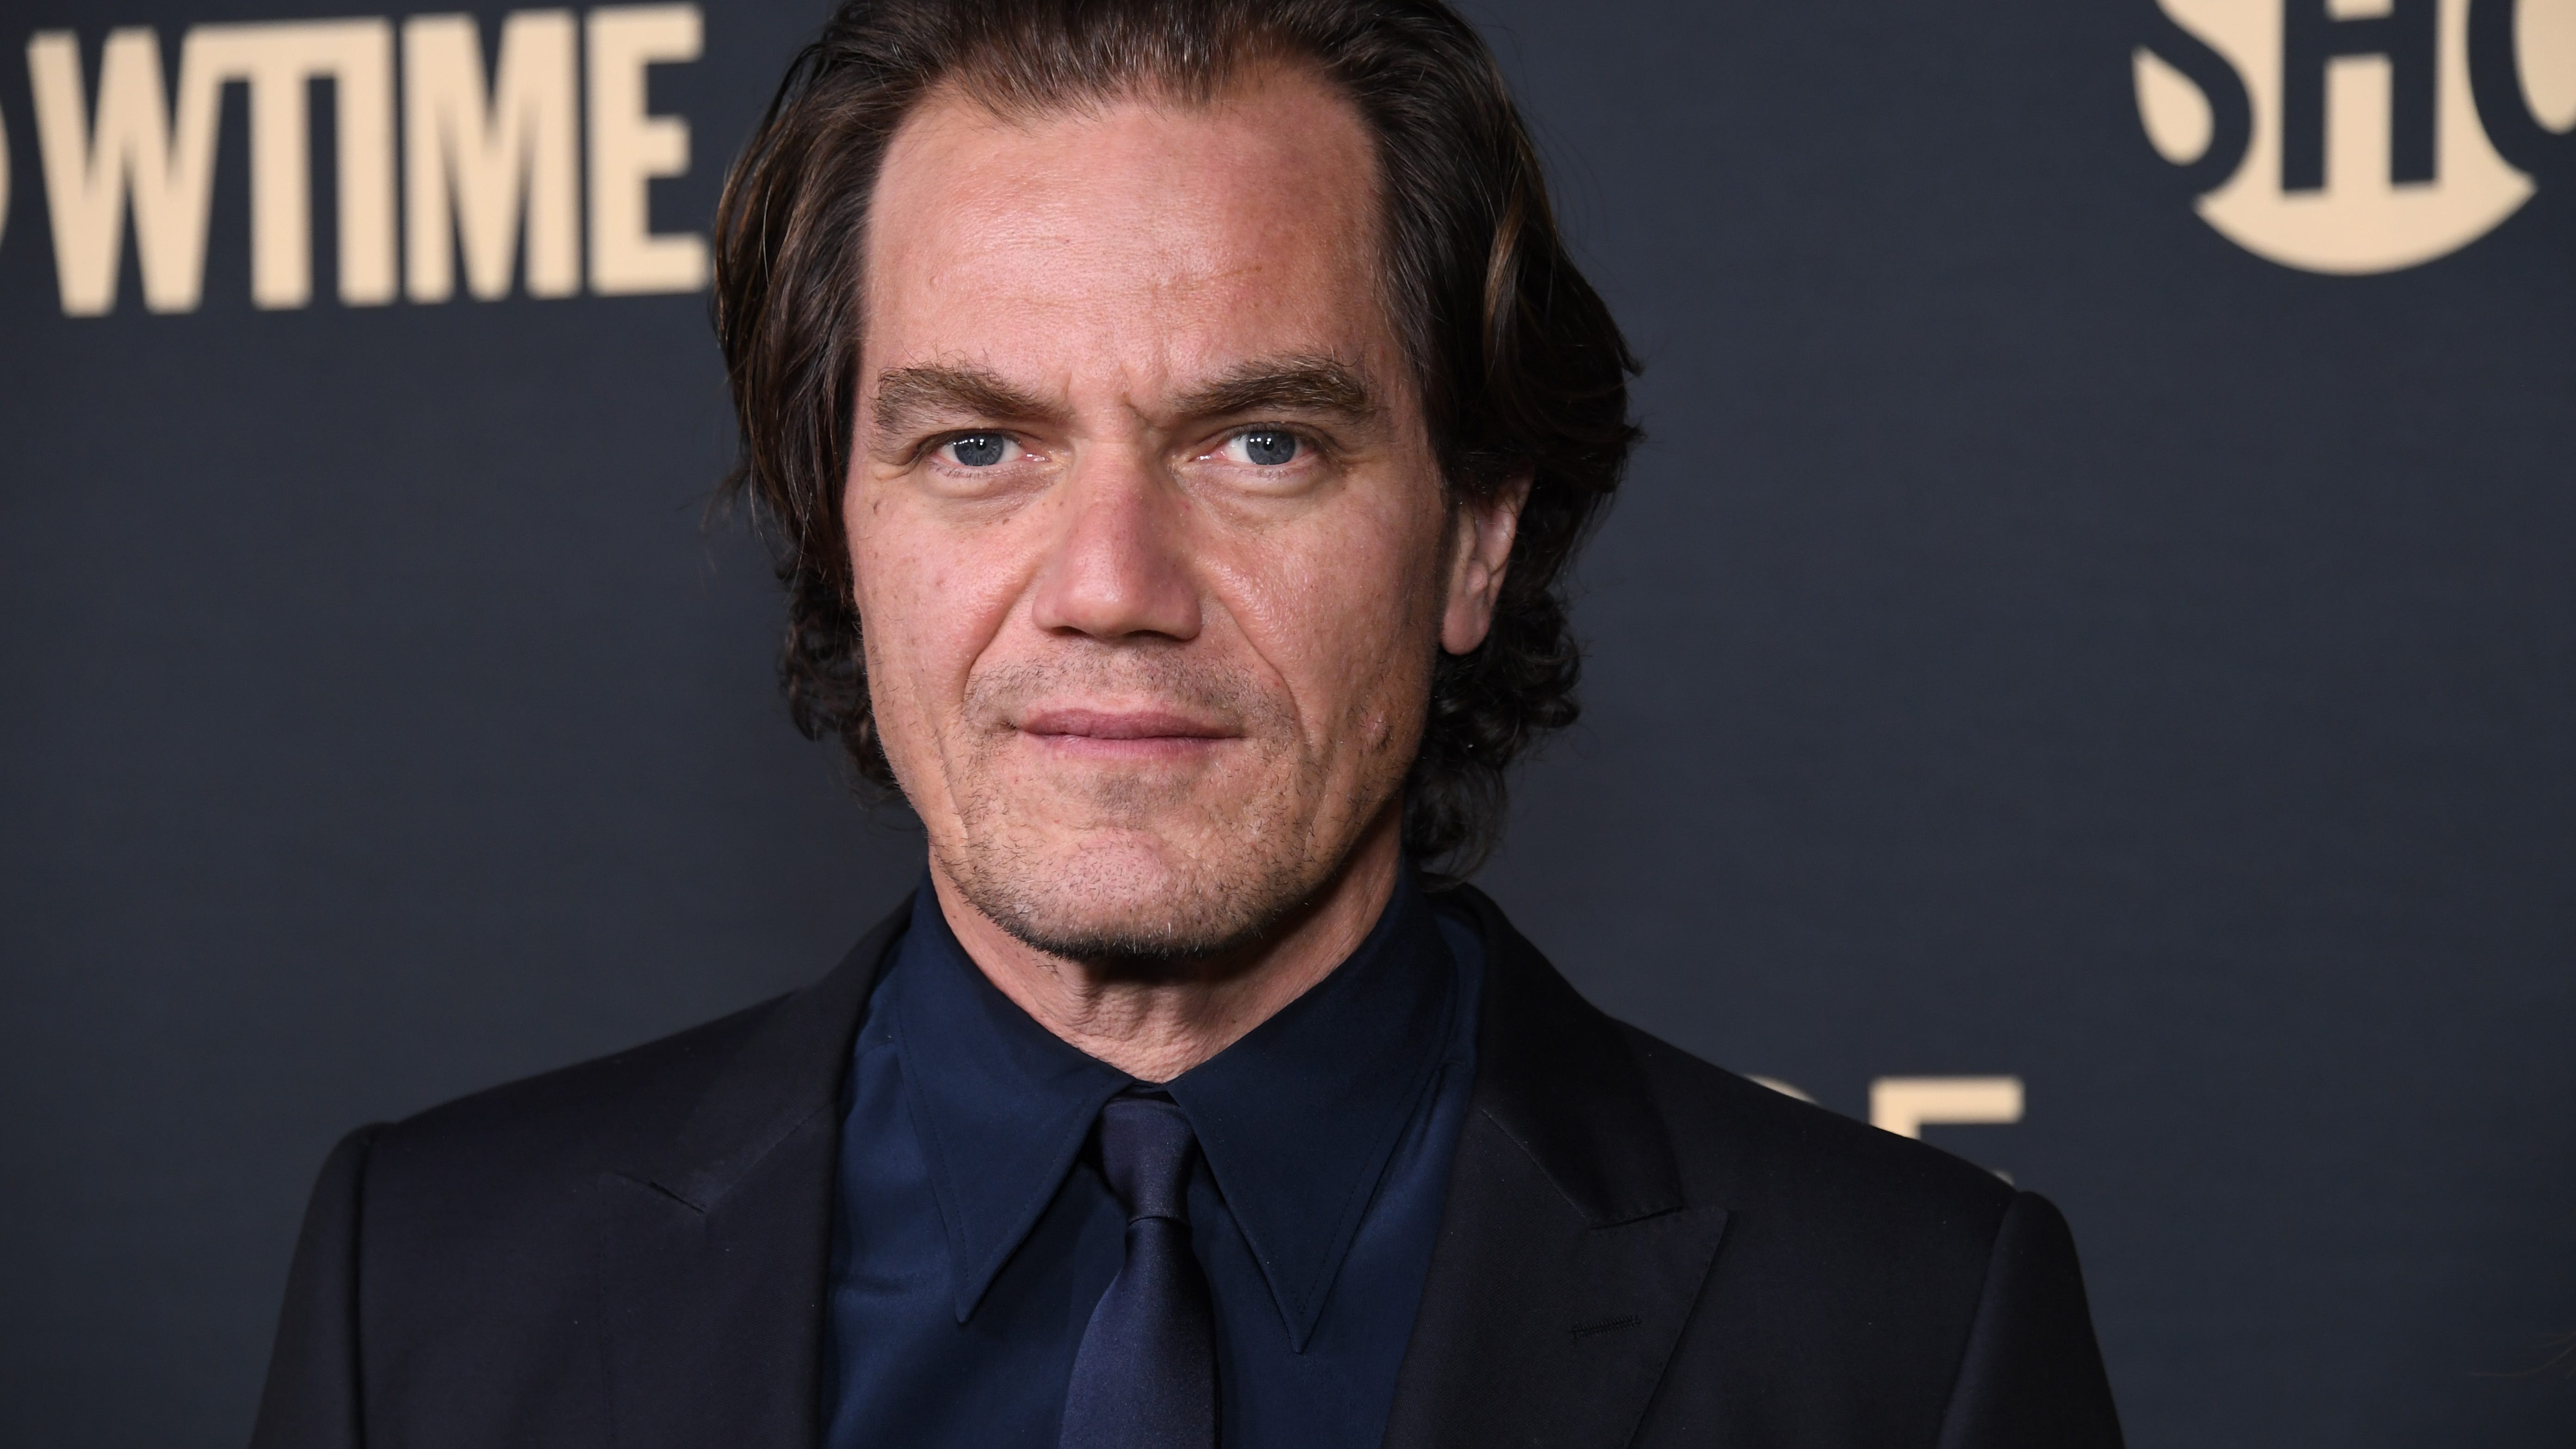 LOS ANGELES, CALIFORNIA - NOVEMBER 21: Michael Shannon attends Showtime's "George & Tammy" Premiere Event at Goya Studios on November 21, 2022 in Los Angeles, California. (Photo by Jon Kopaloff/Getty Images) ORG XMIT: 775900636 ORIG FILE ID: 1443487550